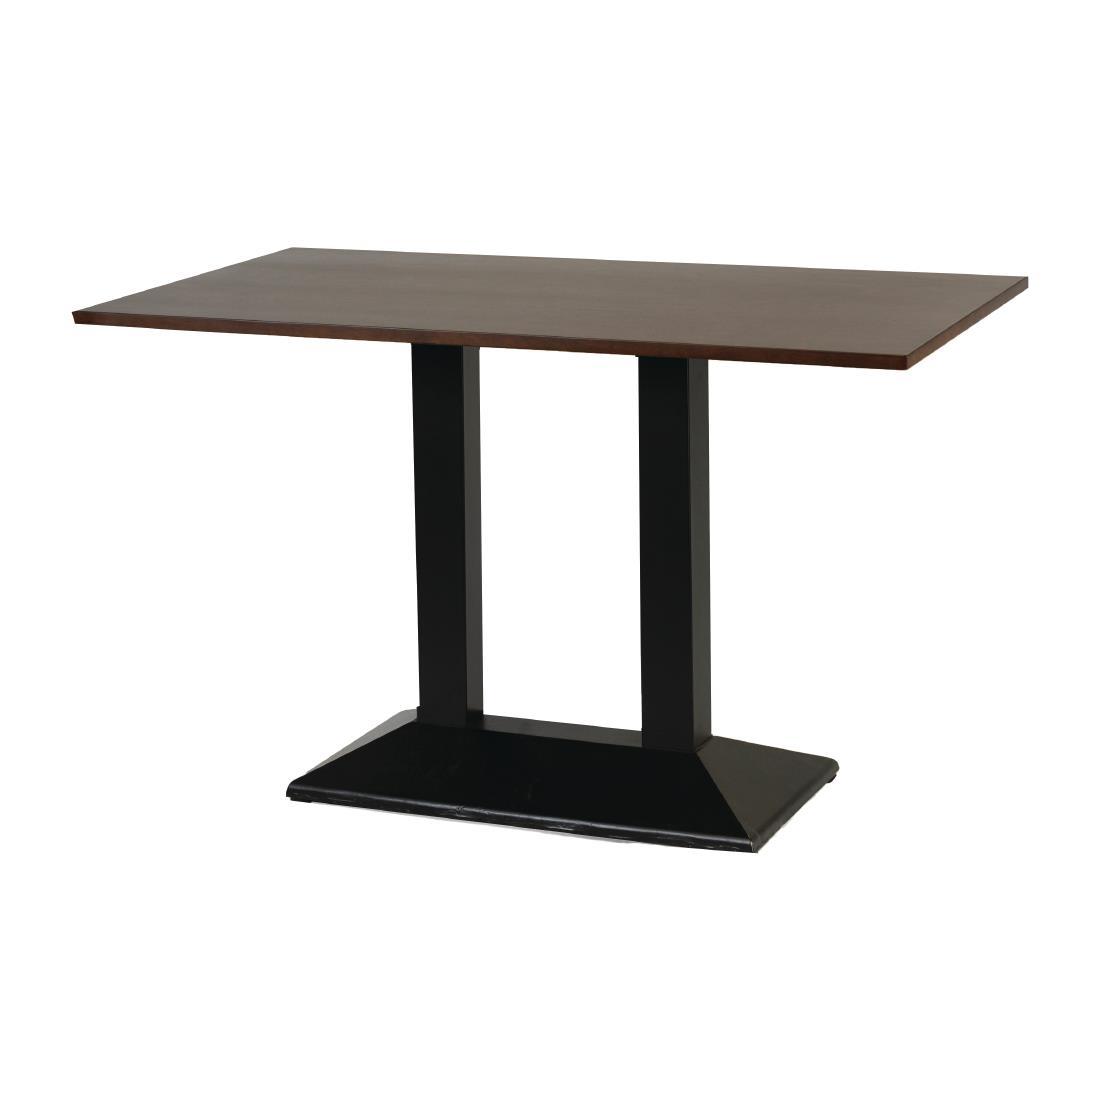 Turin Metal Base Pedestal Rectangle Table with Dark Wood Top 1200x700mm - FT503  - 1